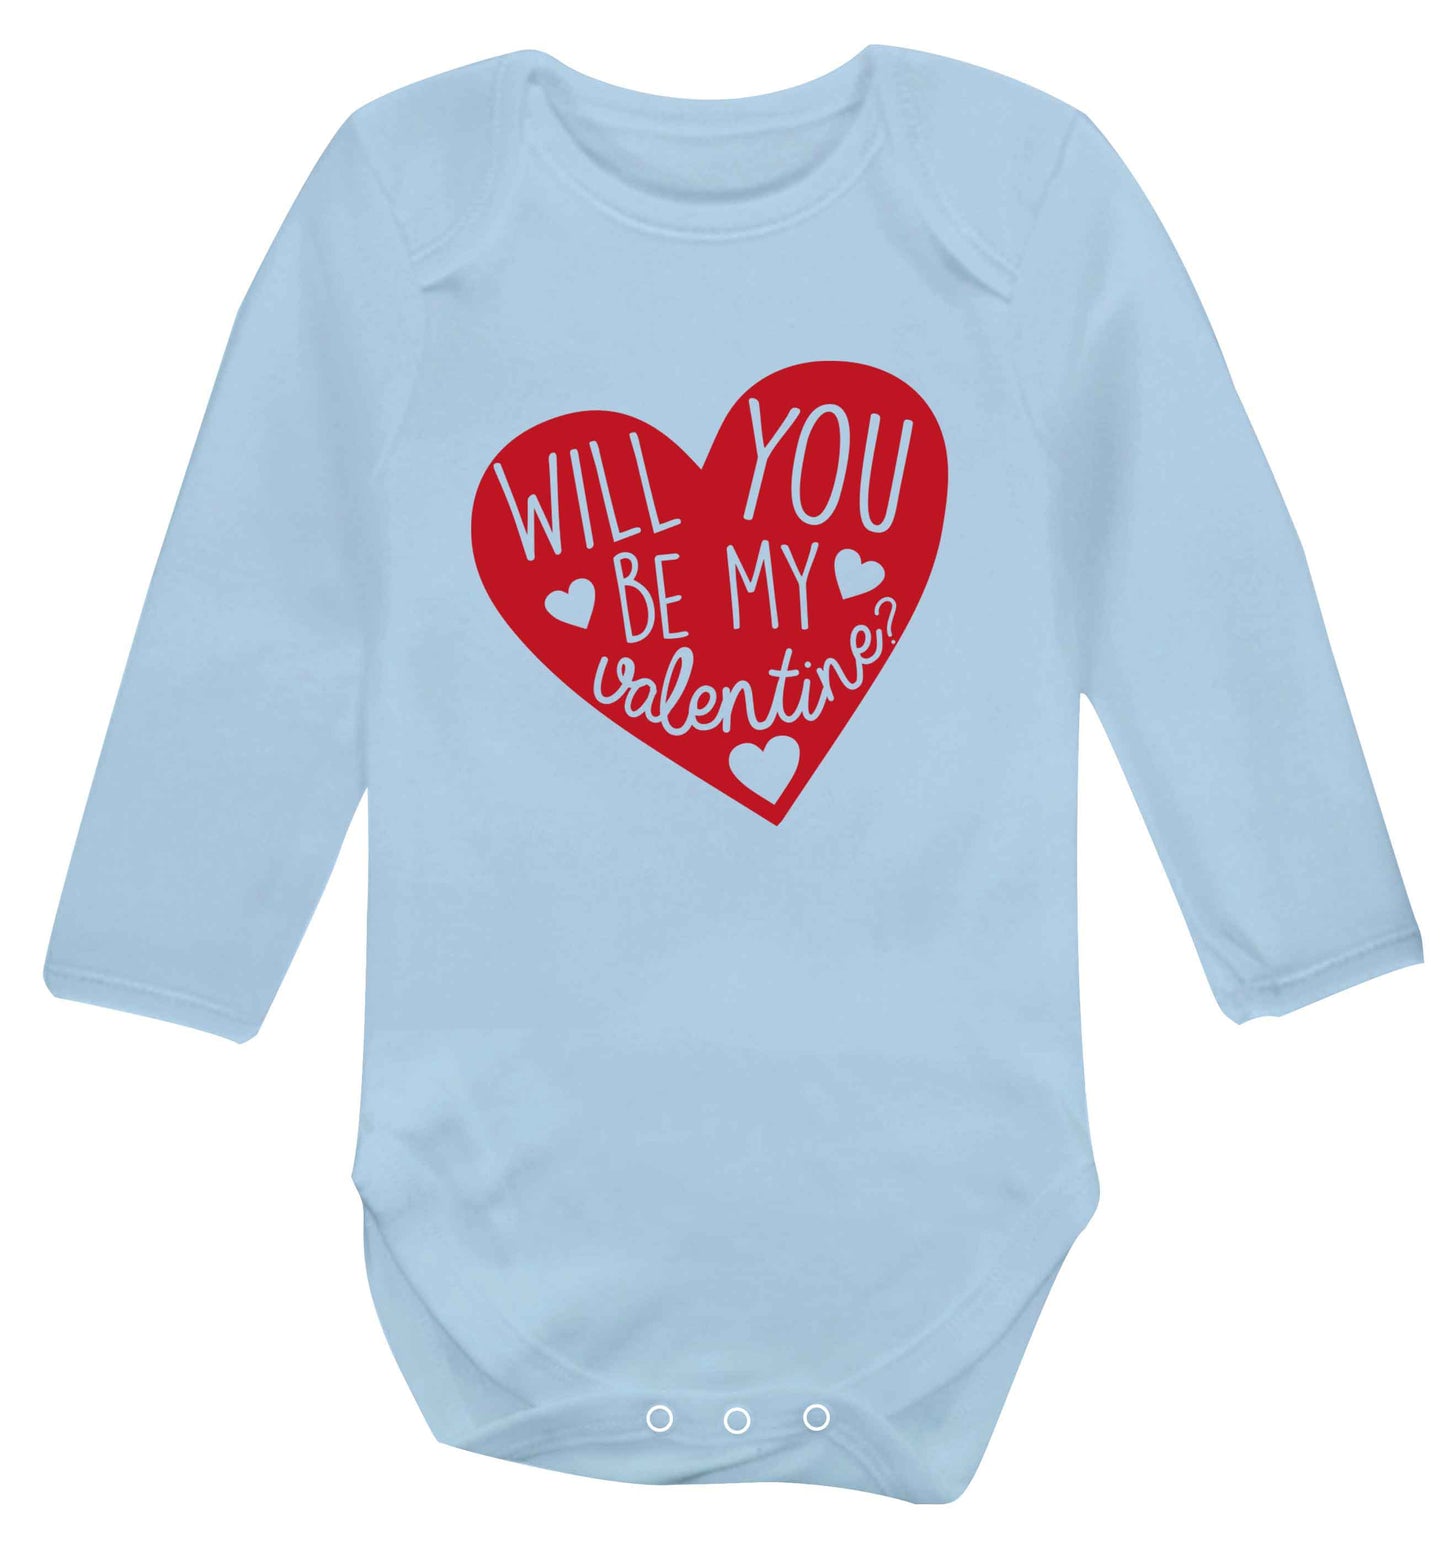 Will you be my valentine? baby vest long sleeved pale blue 6-12 months